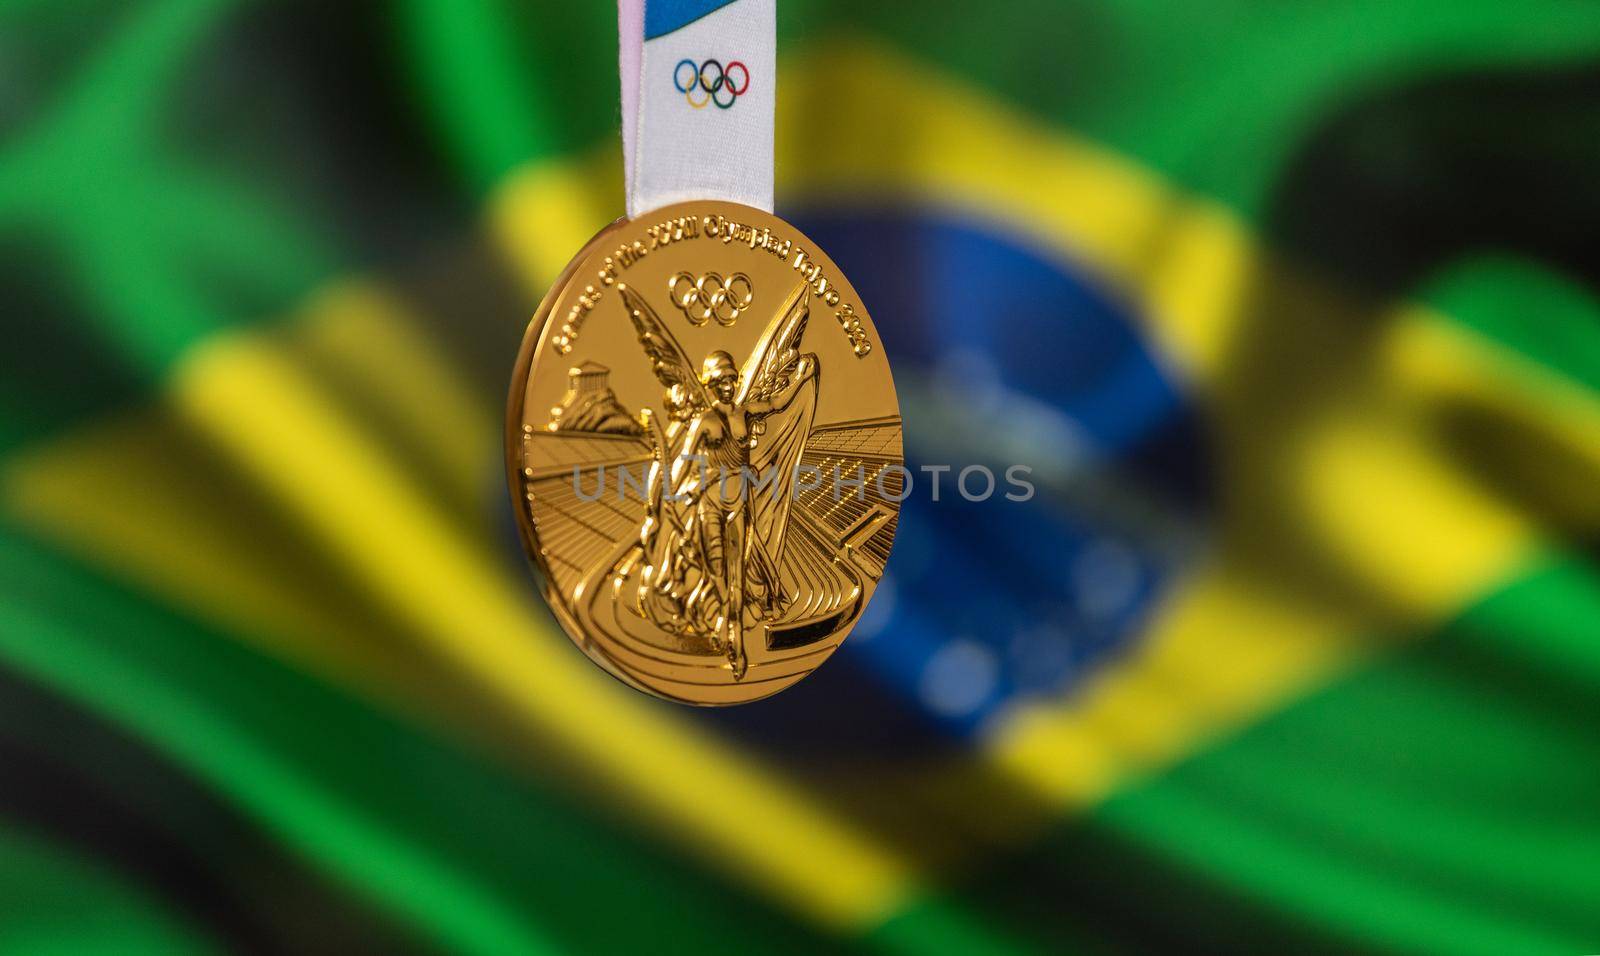 April 25, 2021 Tokyo, Japan. Gold medal of the XXXII Summer Olympic Games 2020 in Tokyo on the background of the flag of Brazil.